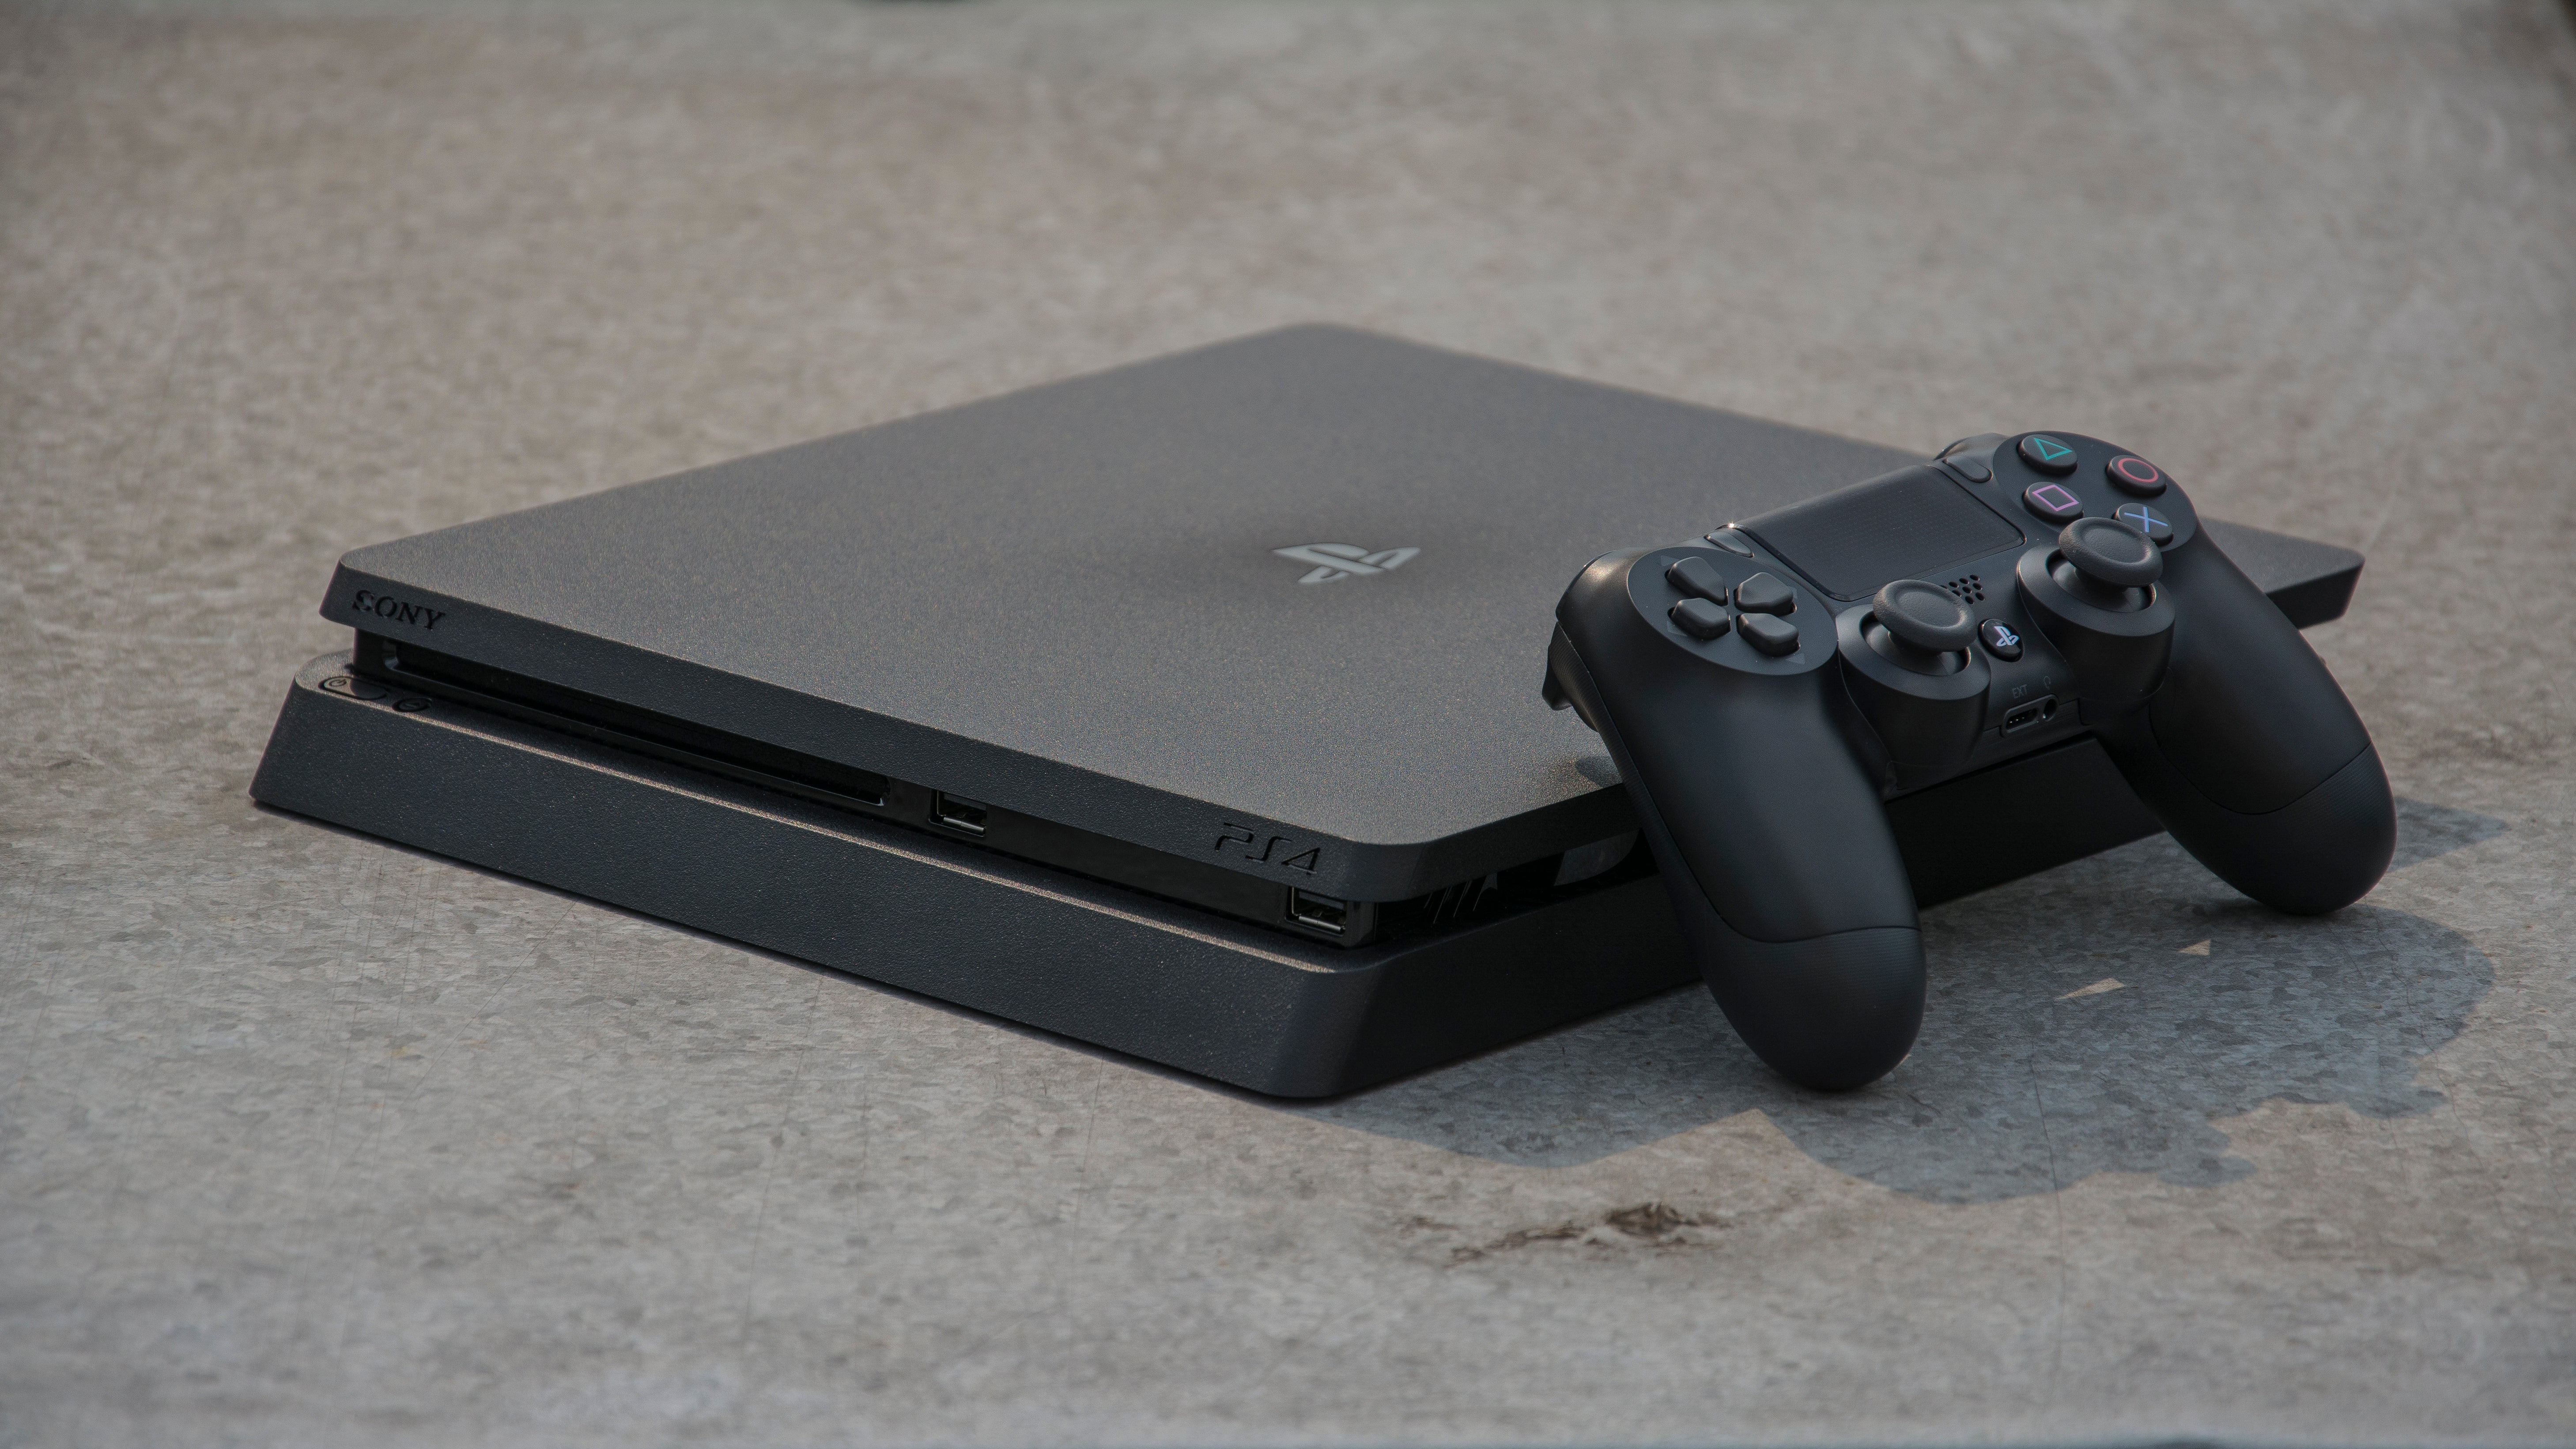 Sony PS4 Slim review: A worthy replacement for the original PS4 